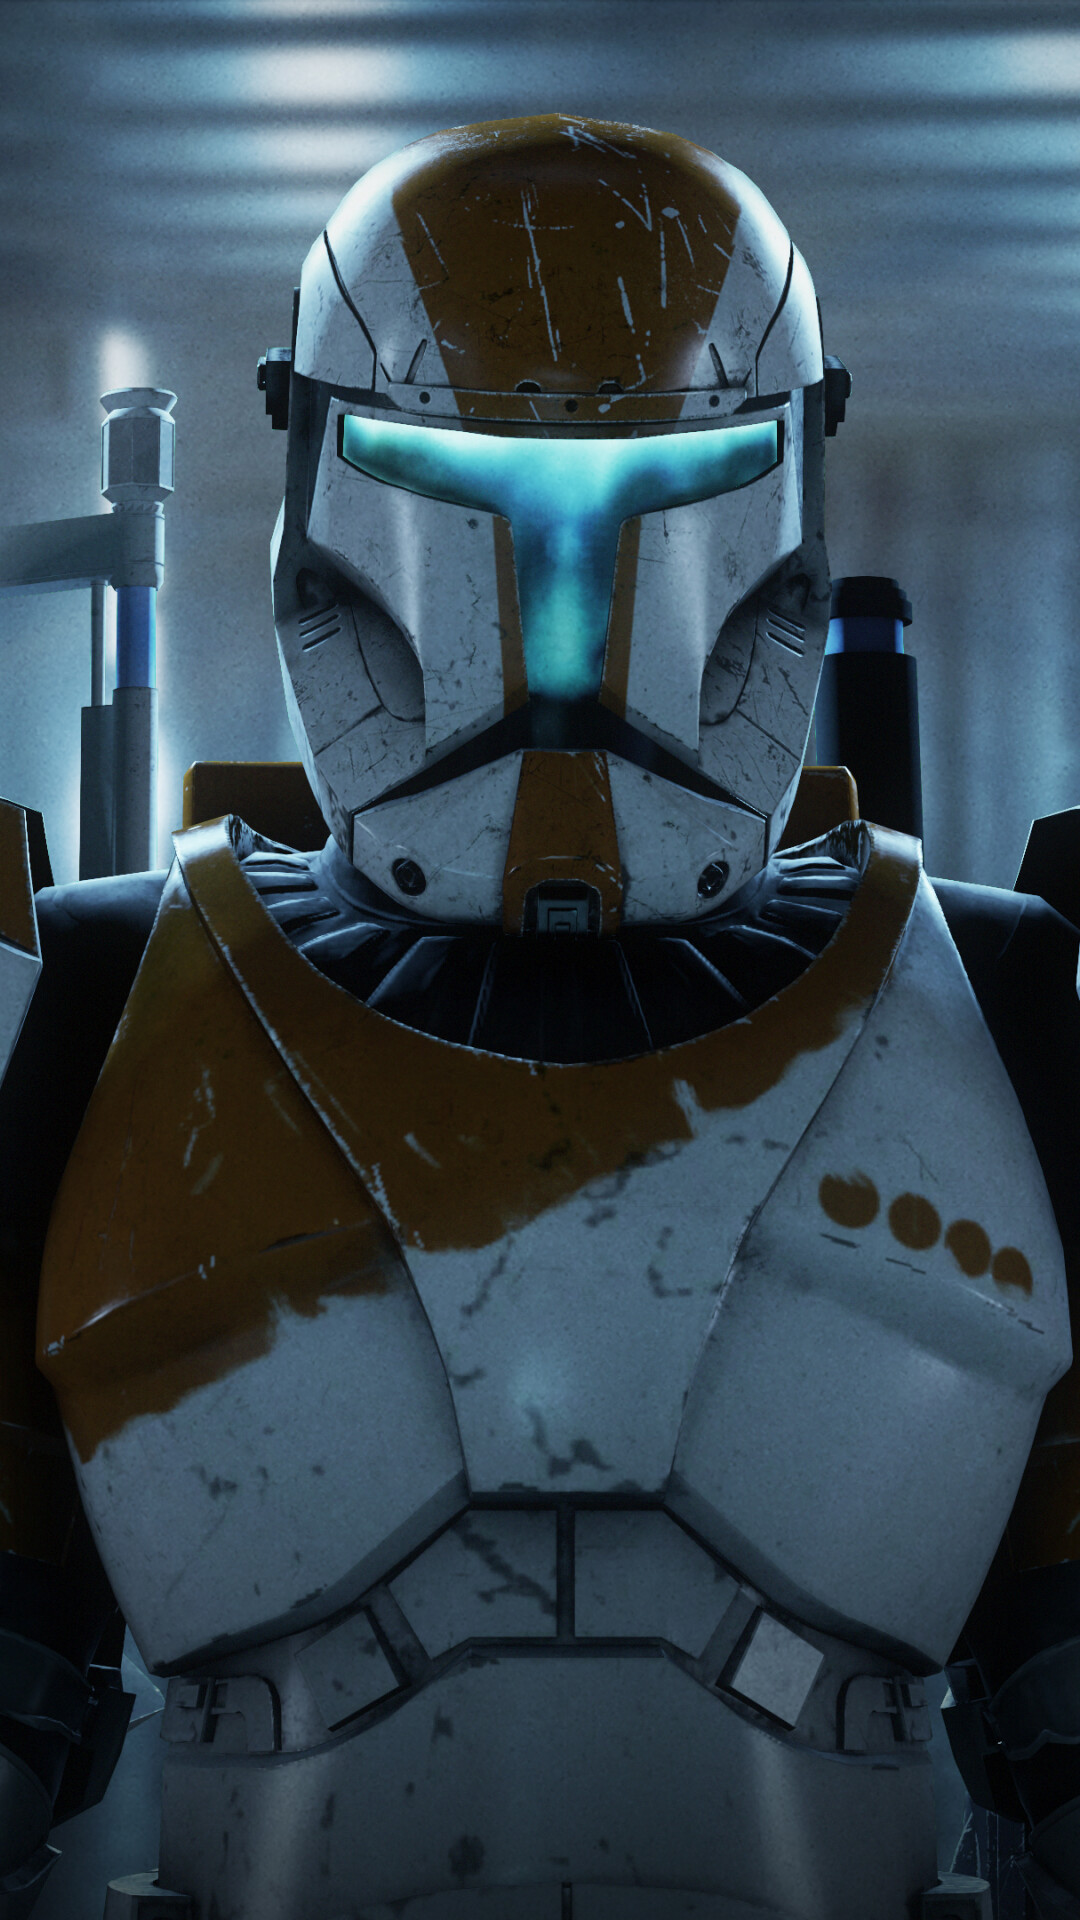 Star Wars: Republic Commando, A tactical first-person shooter video game developed and published by LucasArts. 1080x1920 Full HD Wallpaper.